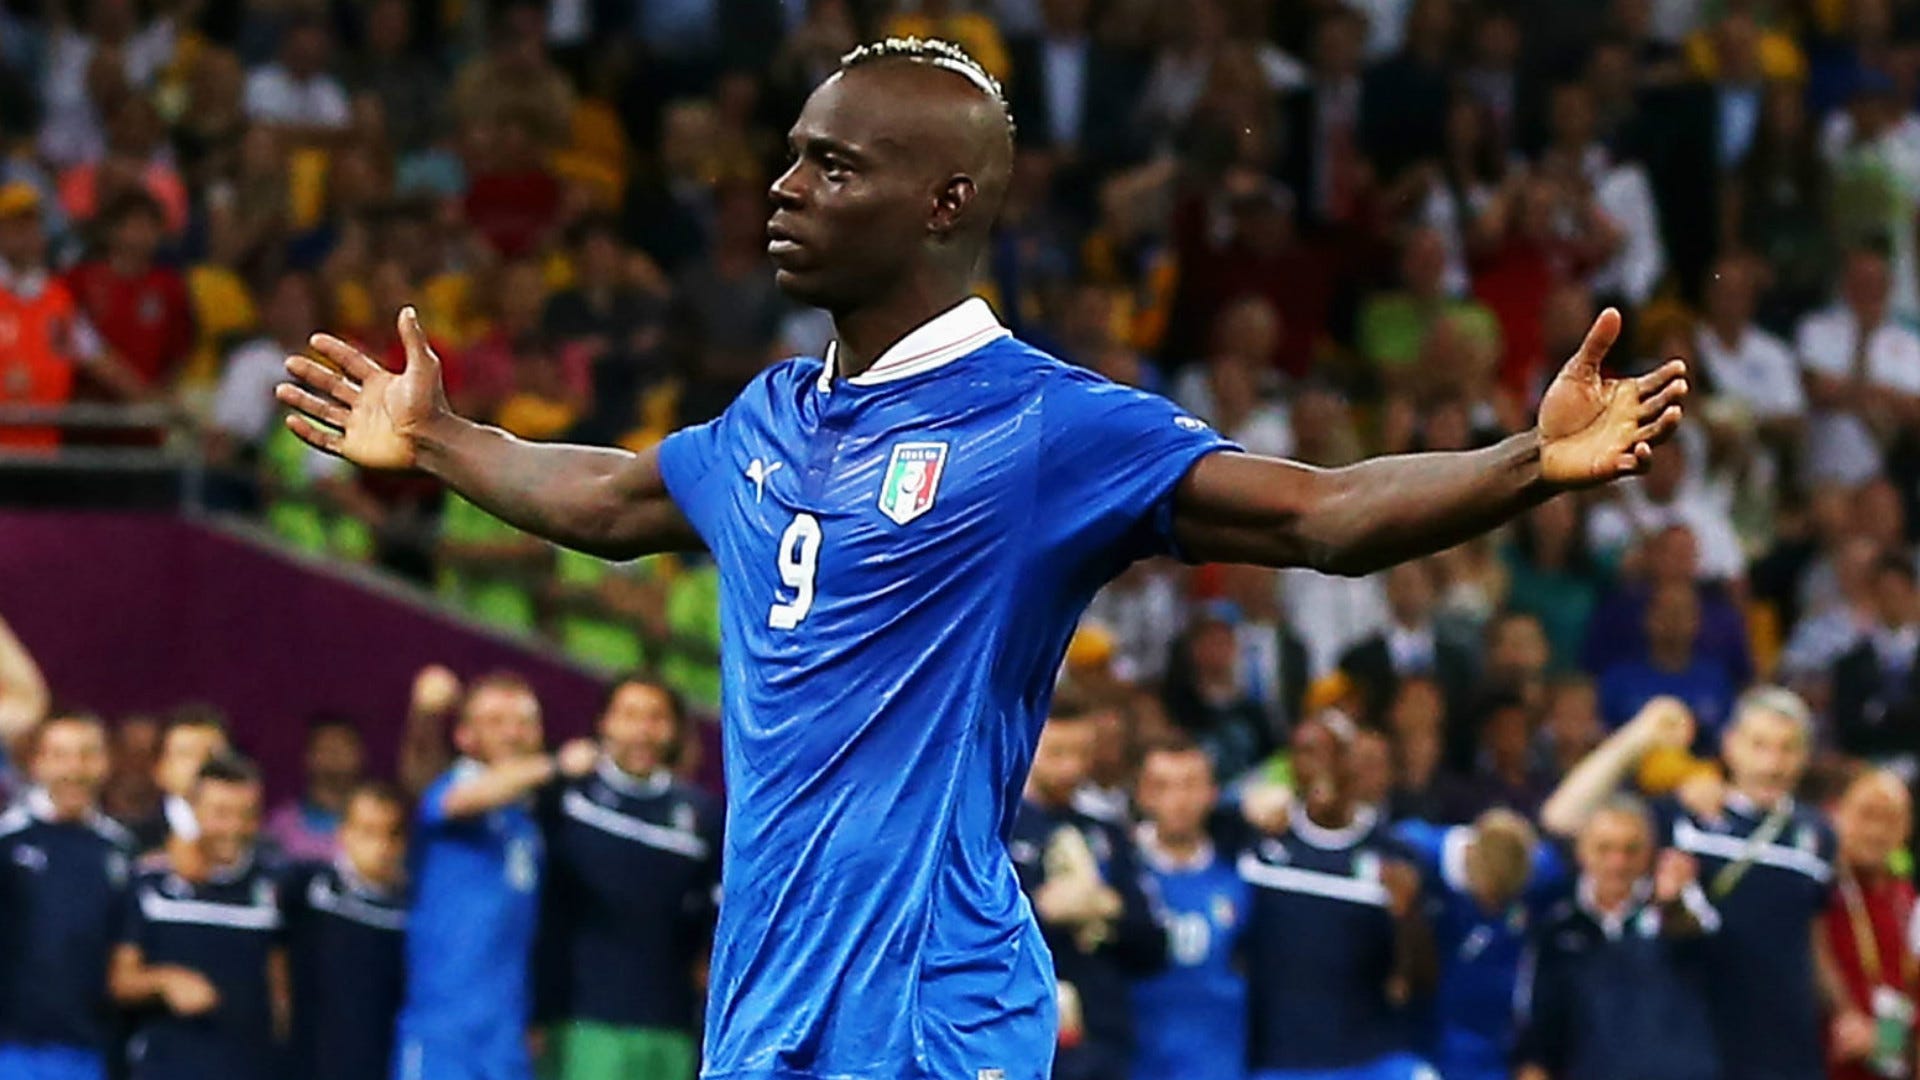 Mario Balotelli peaked at the Euros - and his Monza spell could help him rediscover a lost spark | Goal.com